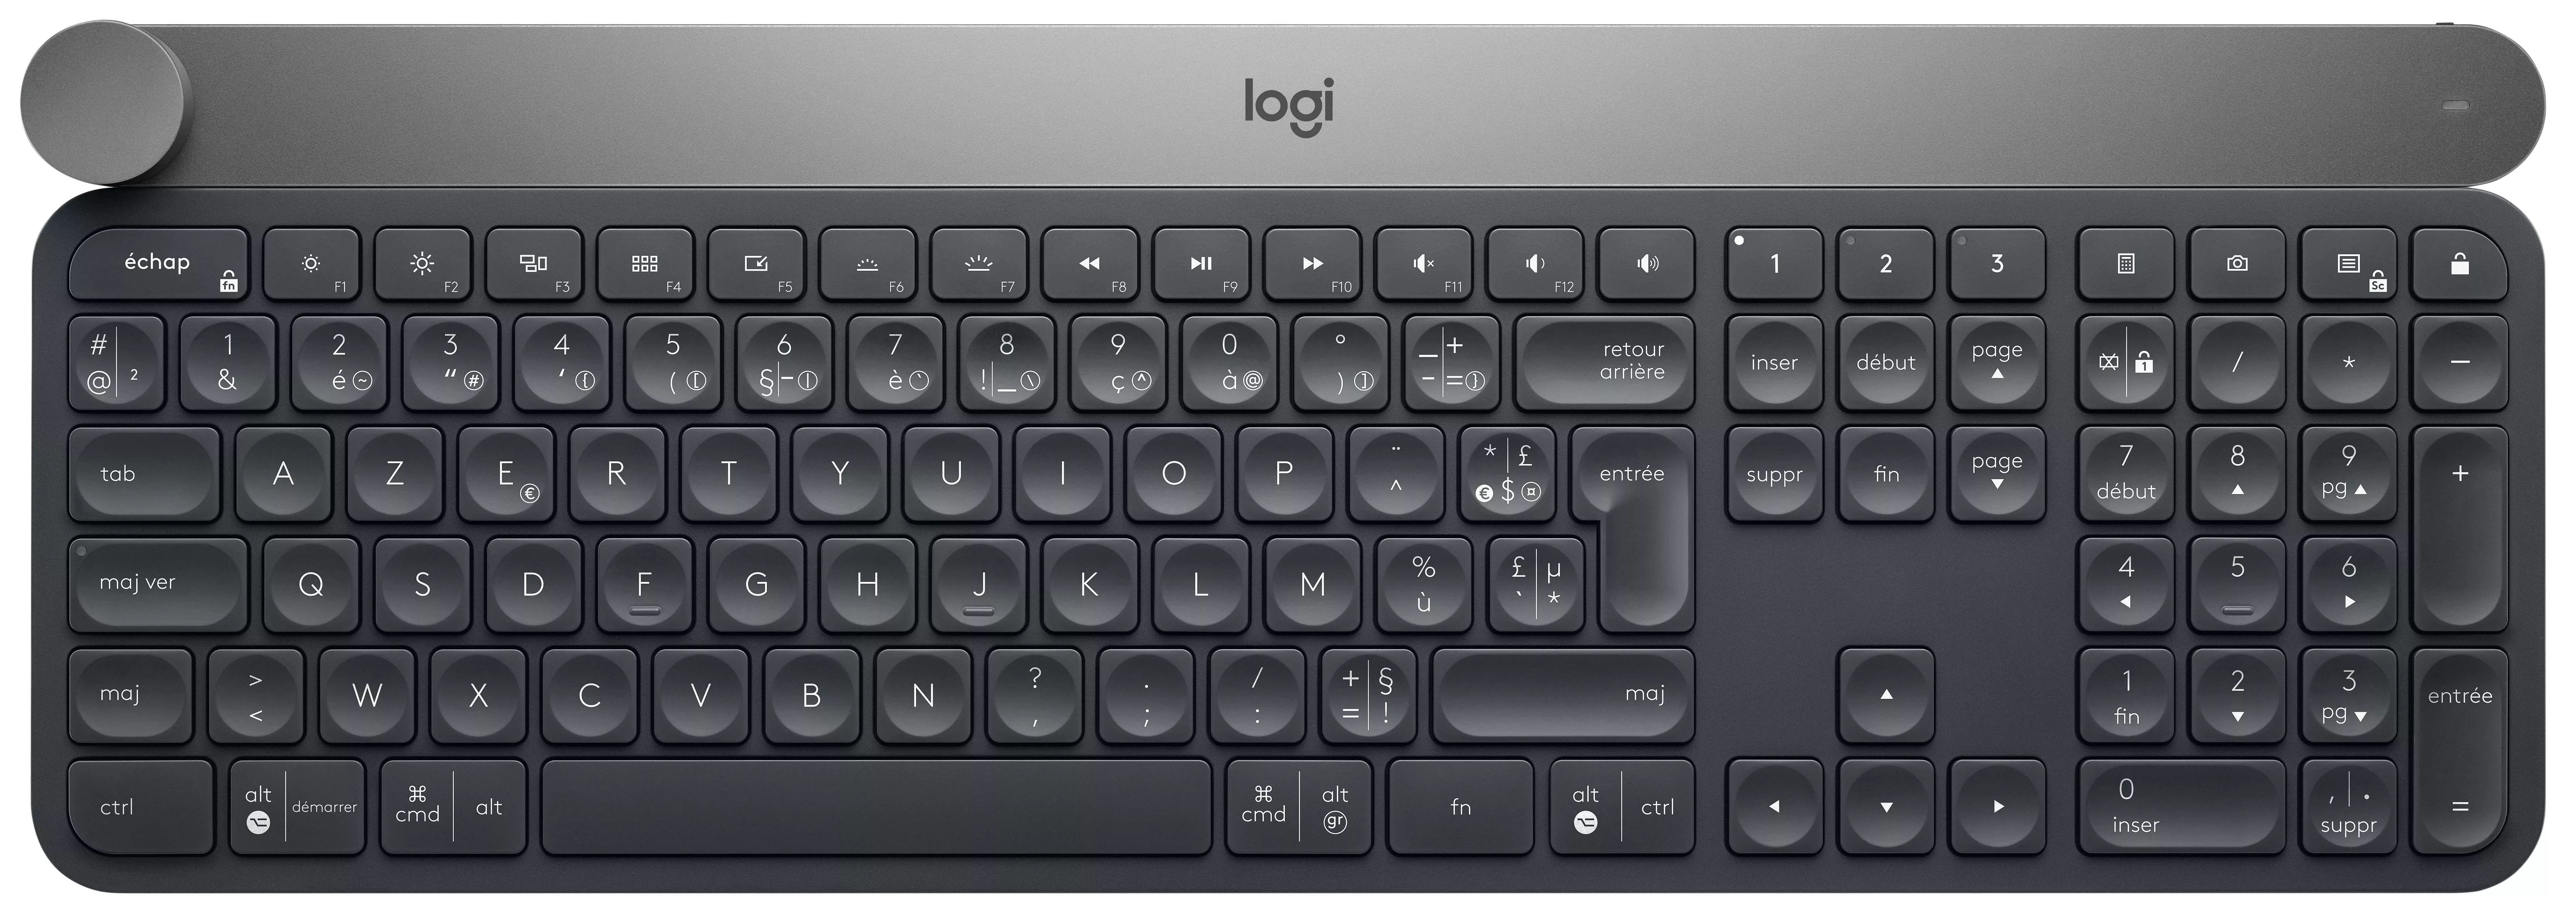 Vente Pack Clavier, souris LOGITECH Craft Advanced keyboard with creative input dial sur hello RSE